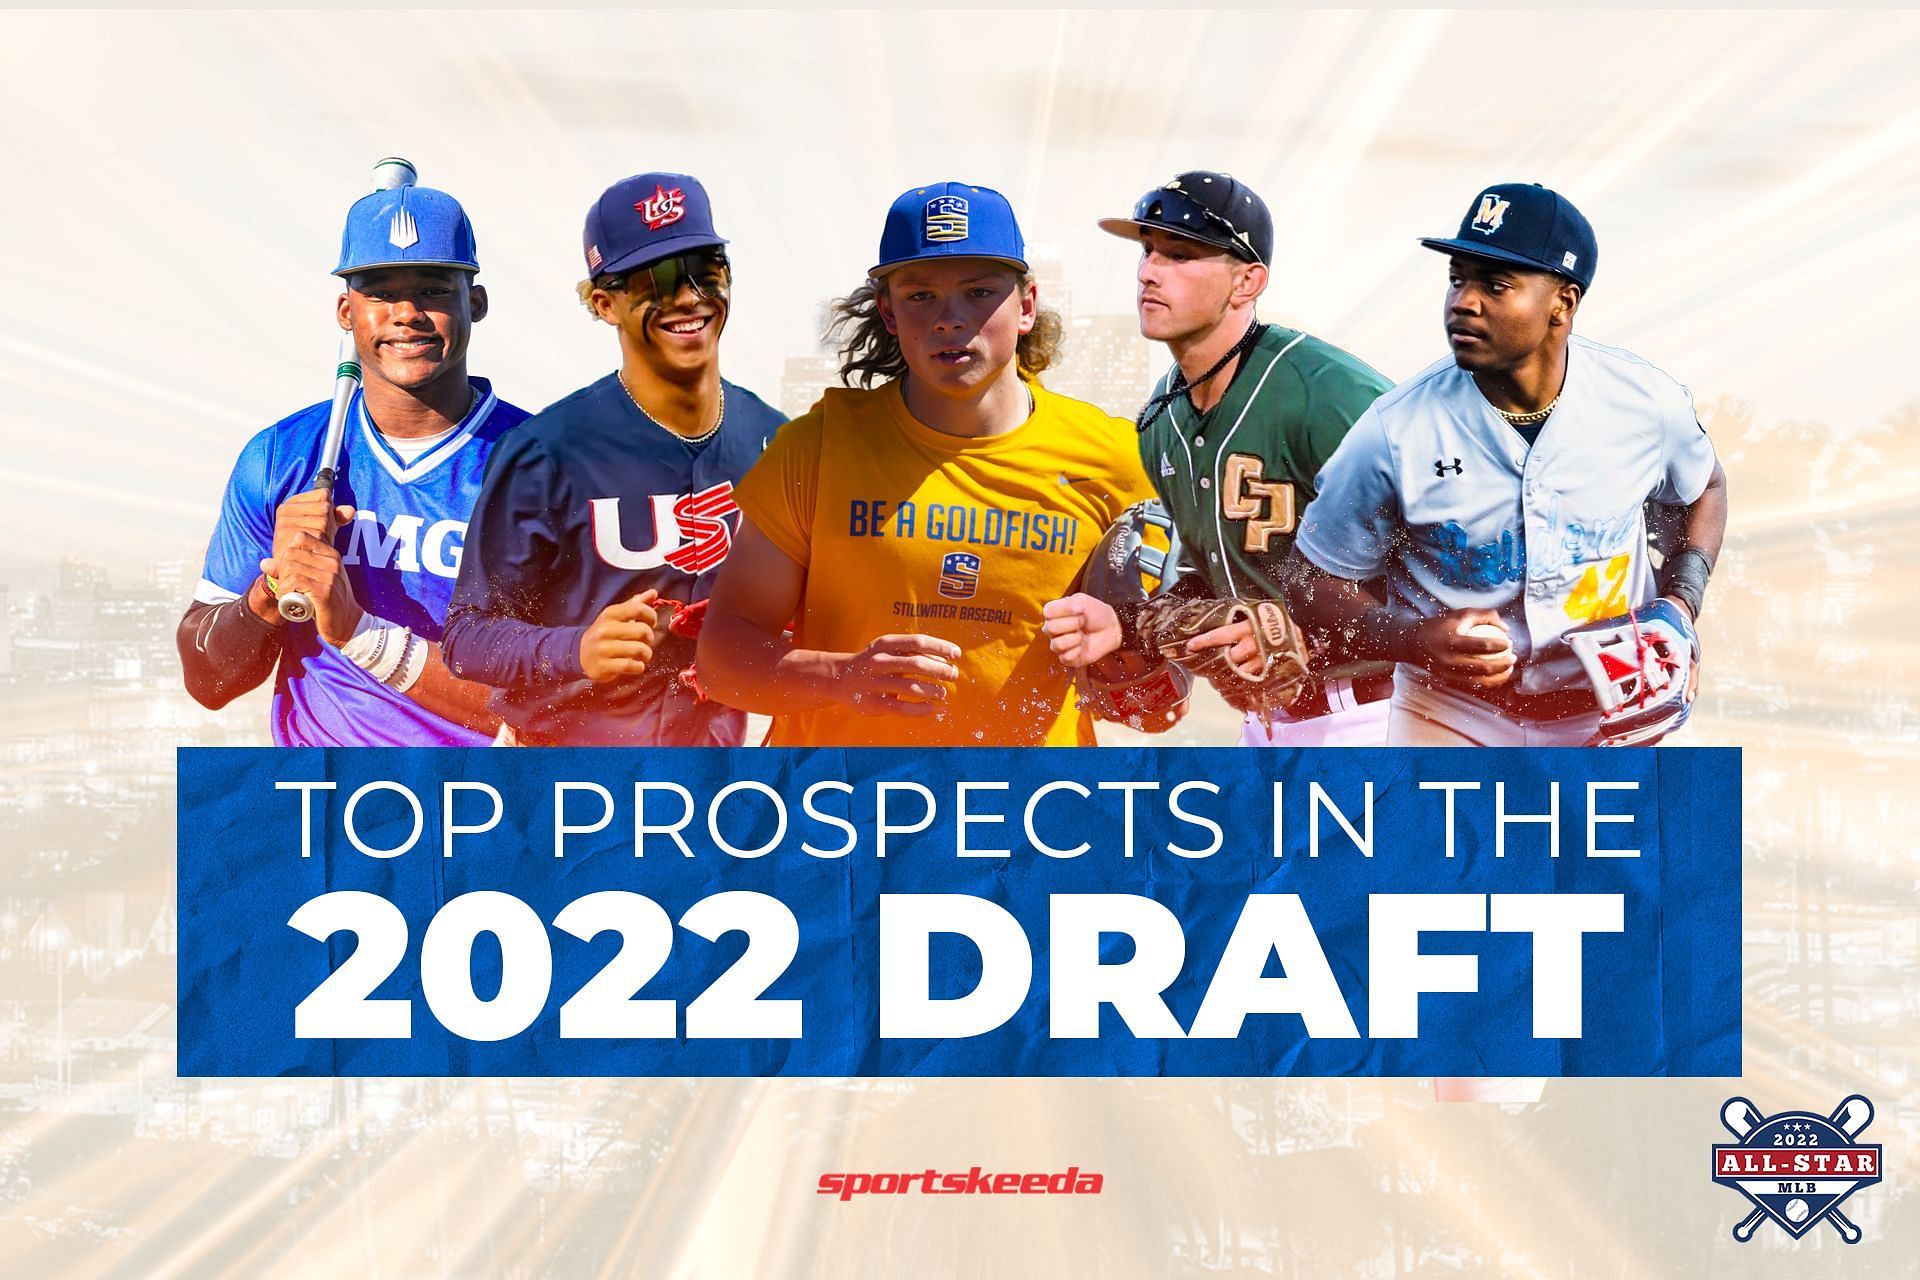 Top 5 prospects in the 2022 MLB Draft